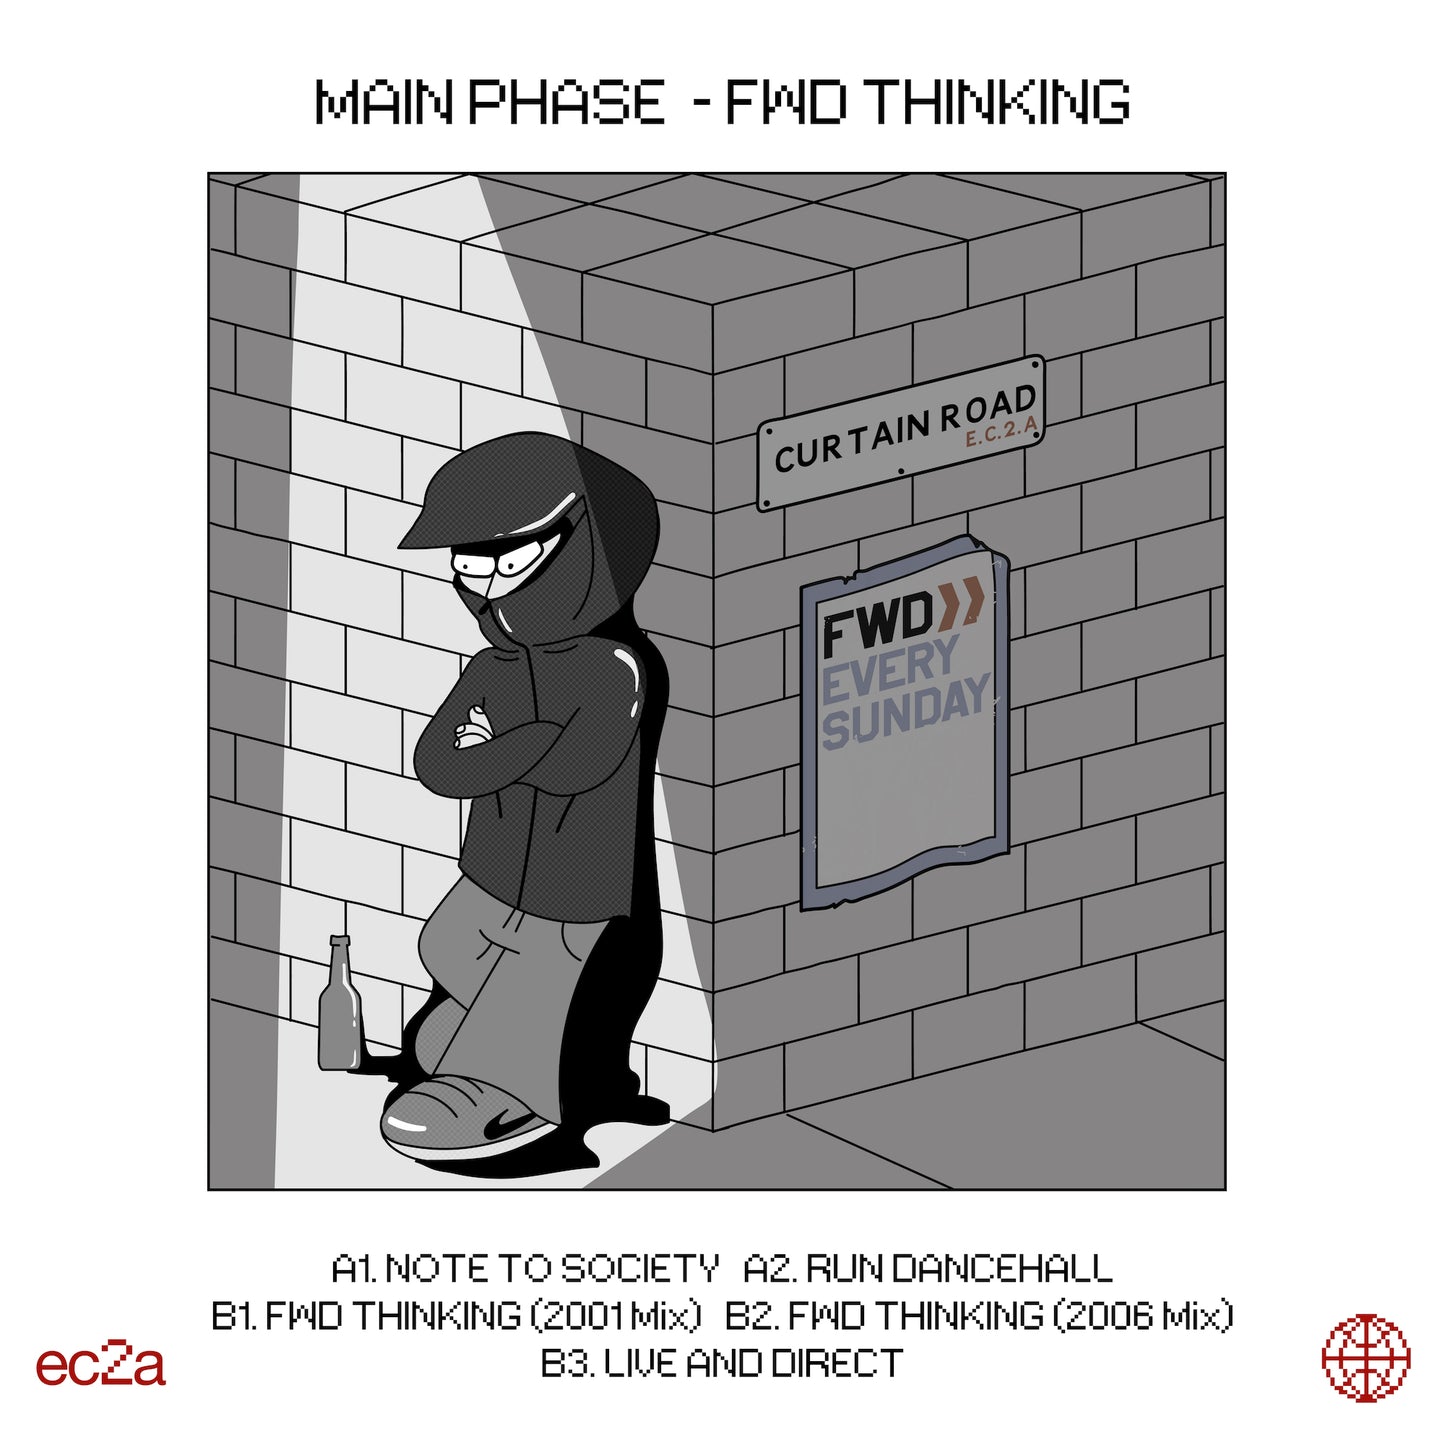 OPM002 - Main Phase - FWD Thinking